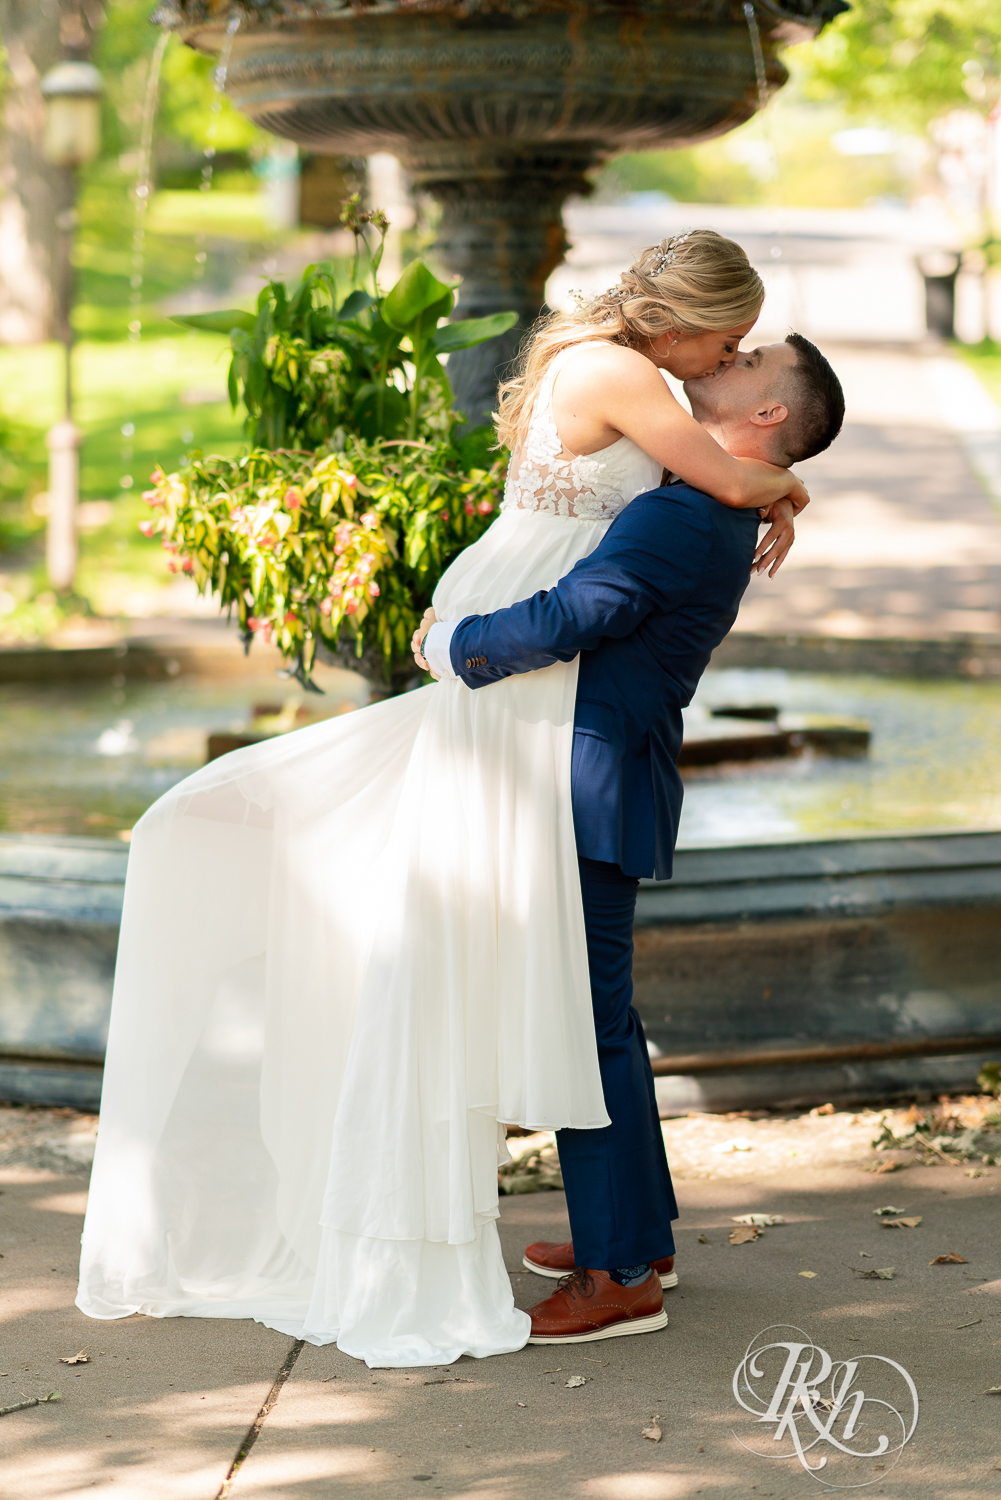 Groom lifts and kisses bride in front of fountain at Irvine Park in Saint Paul, Minnesota.